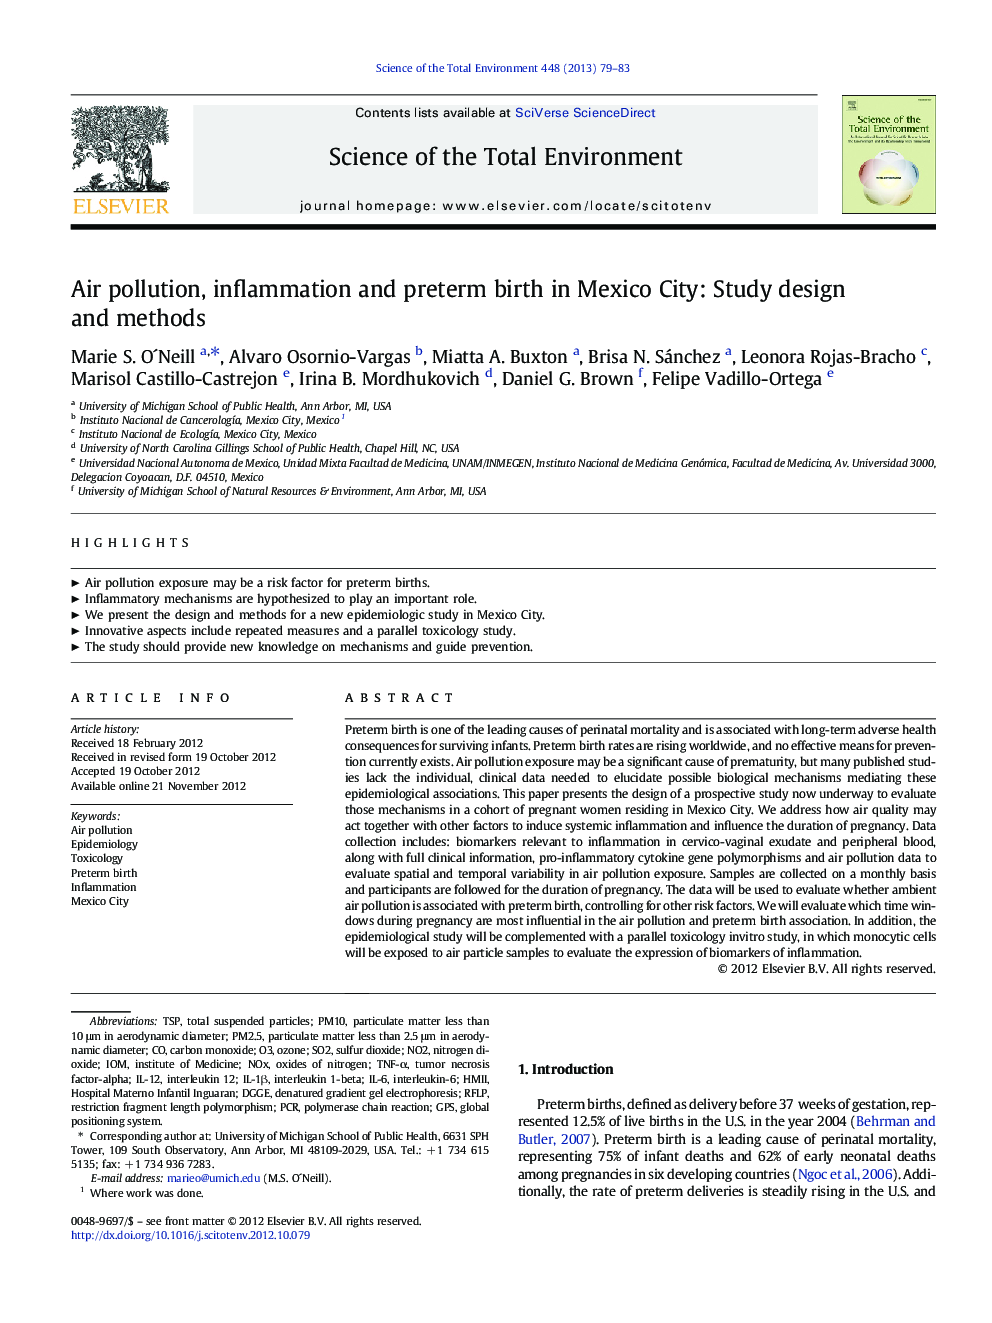 Air pollution, inflammation and preterm birth in Mexico City: Study design and methods